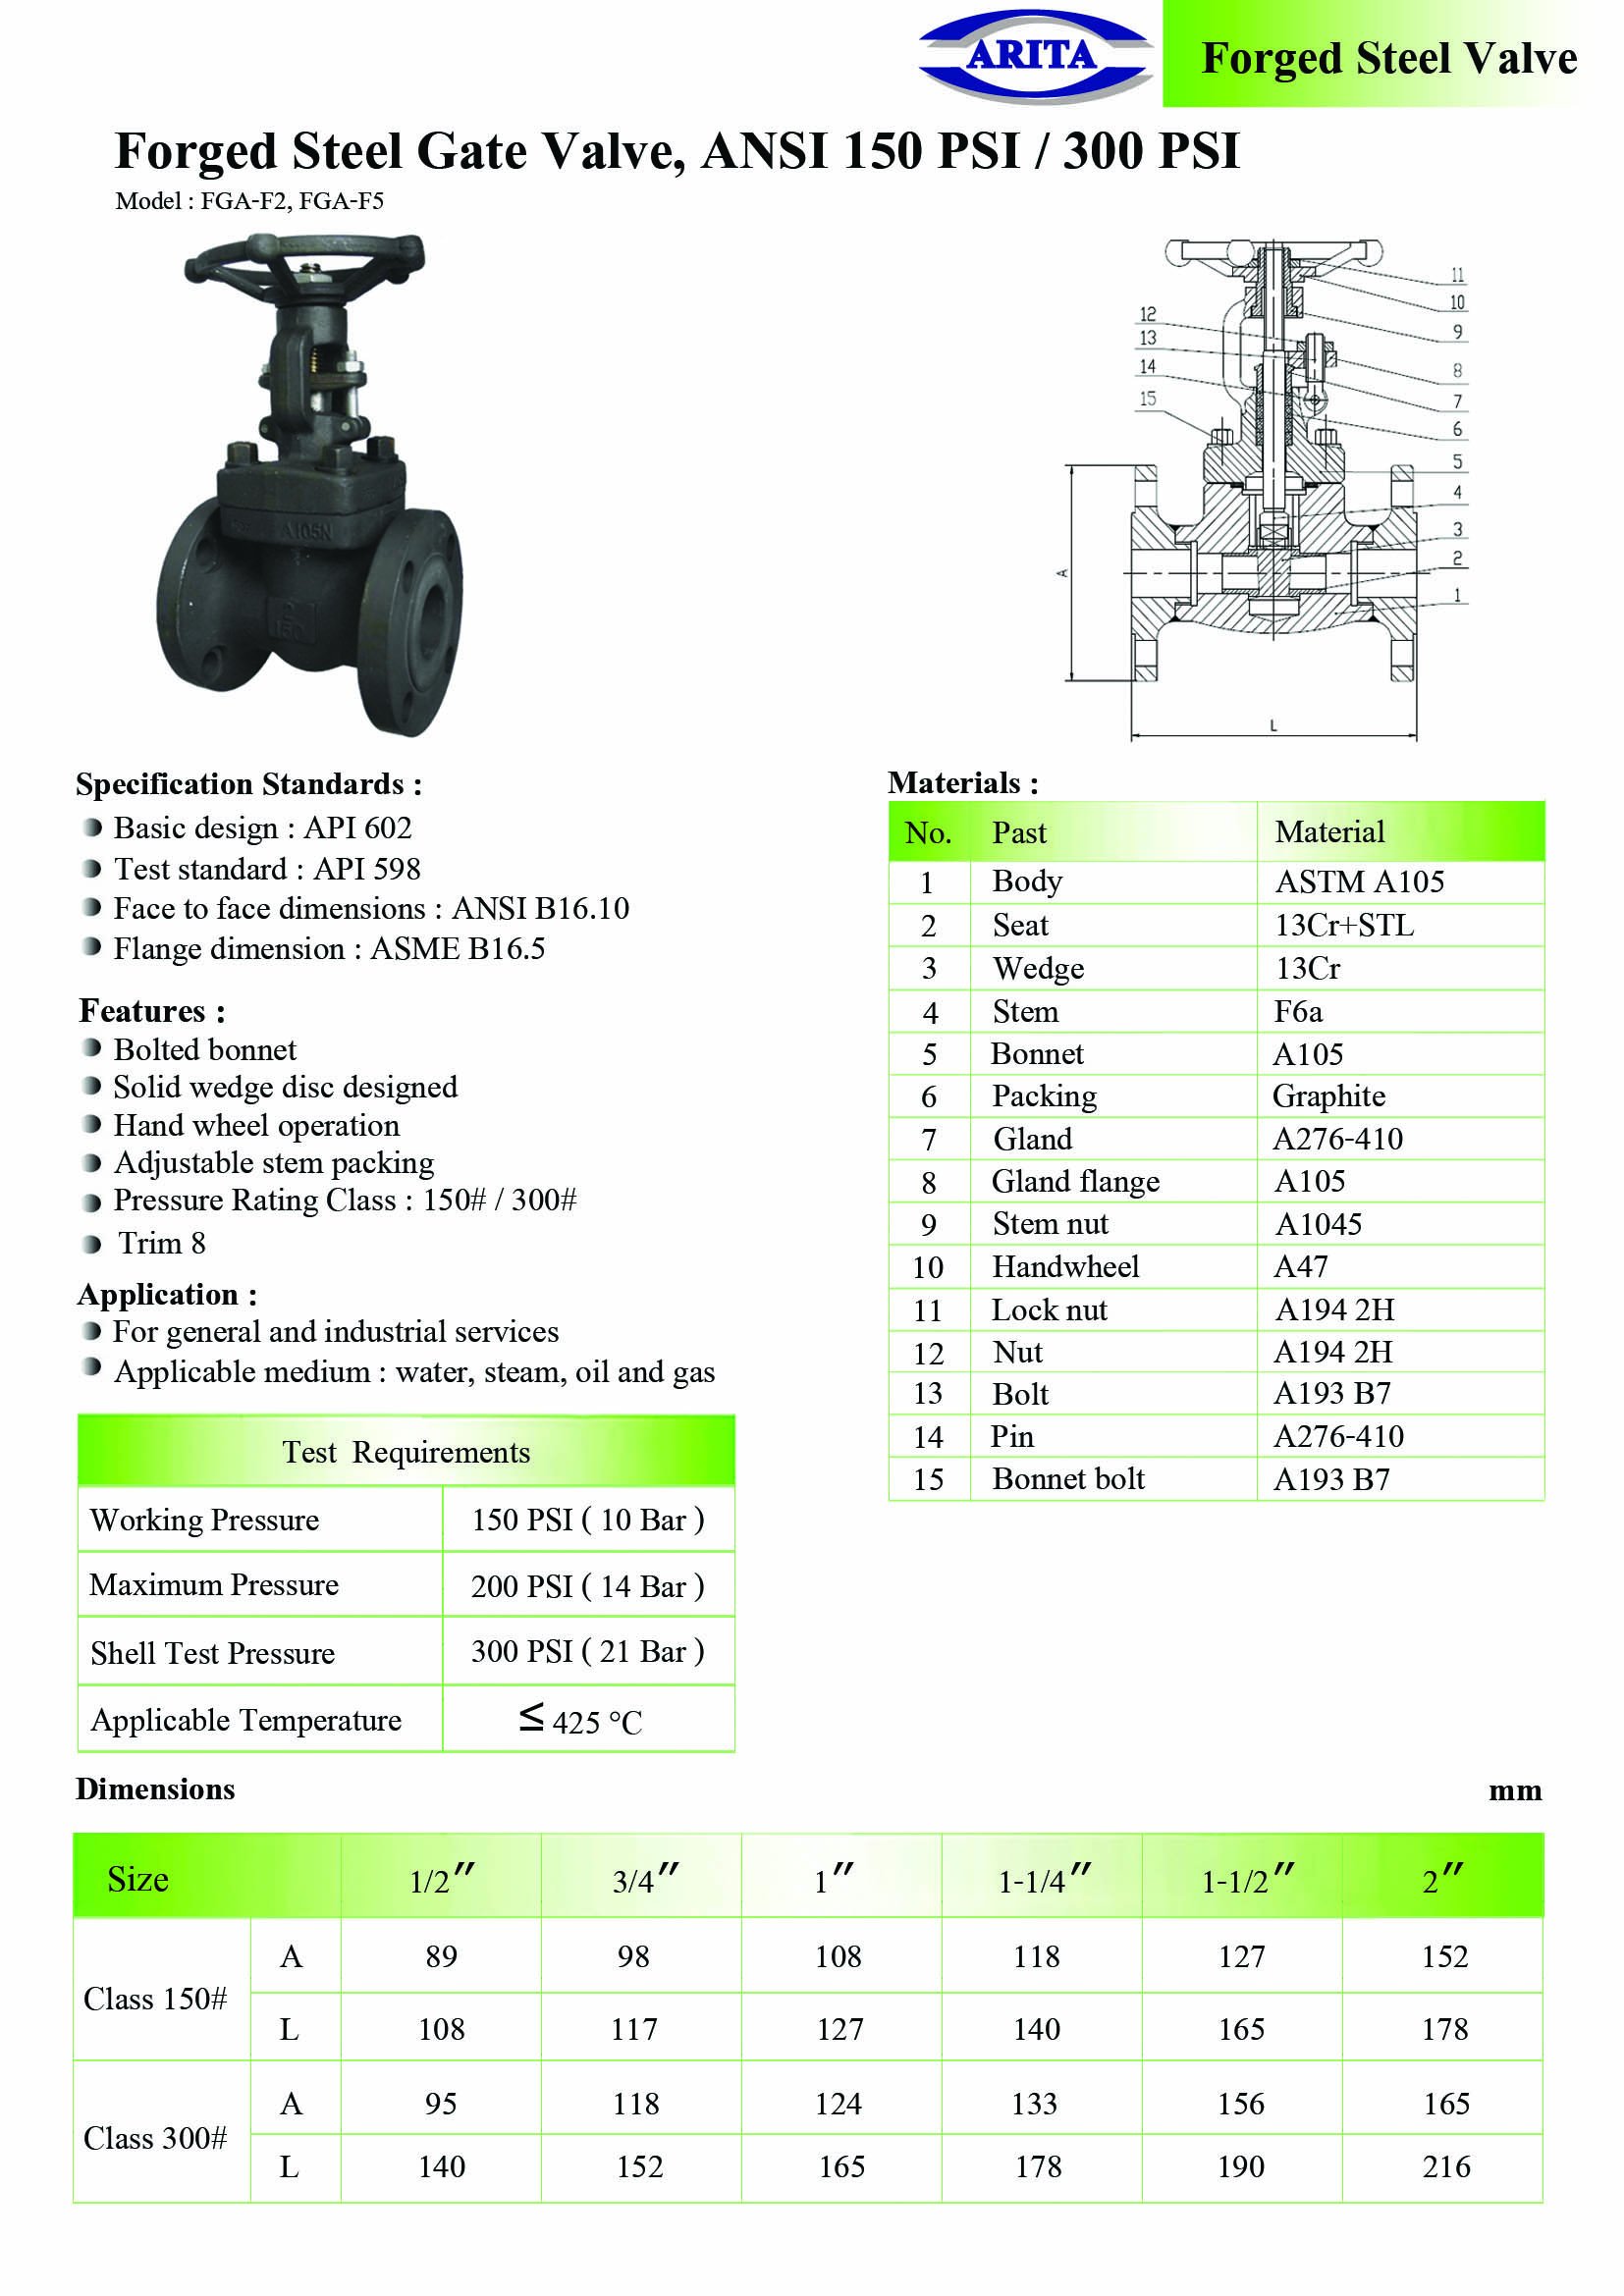 Forged Steel Gate Valve Class 150PSI & 300PSI